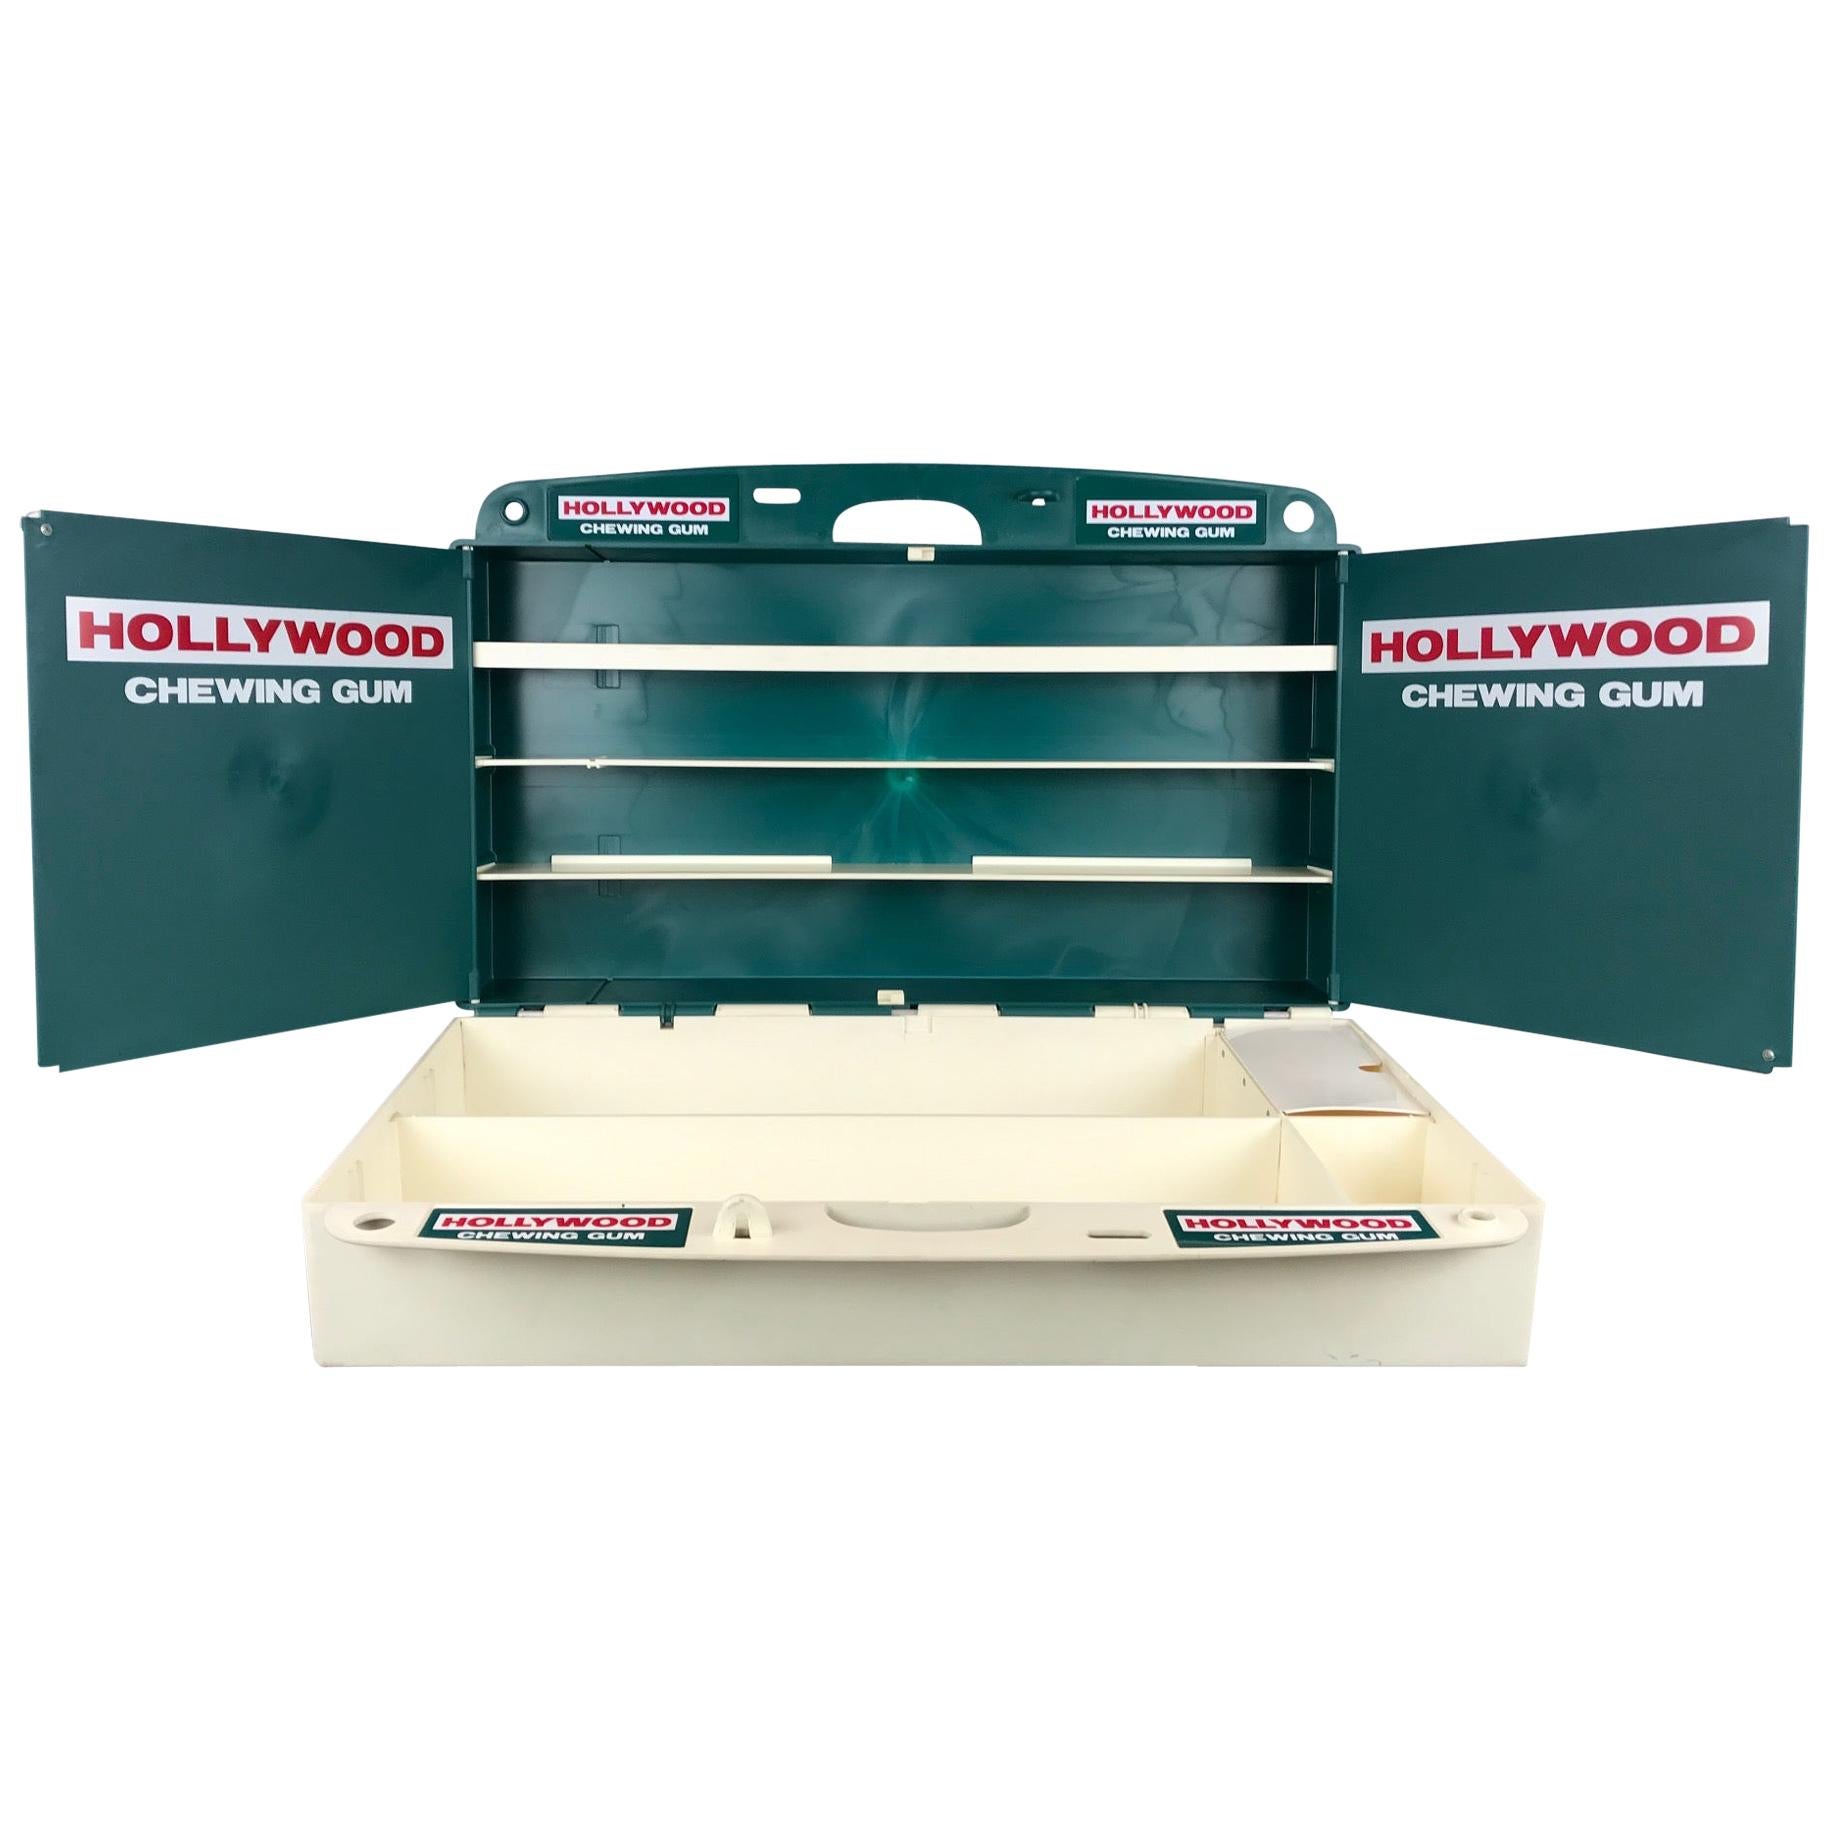 Large Hollywood Chewing Gum Advertising Display Suitcase For Sale